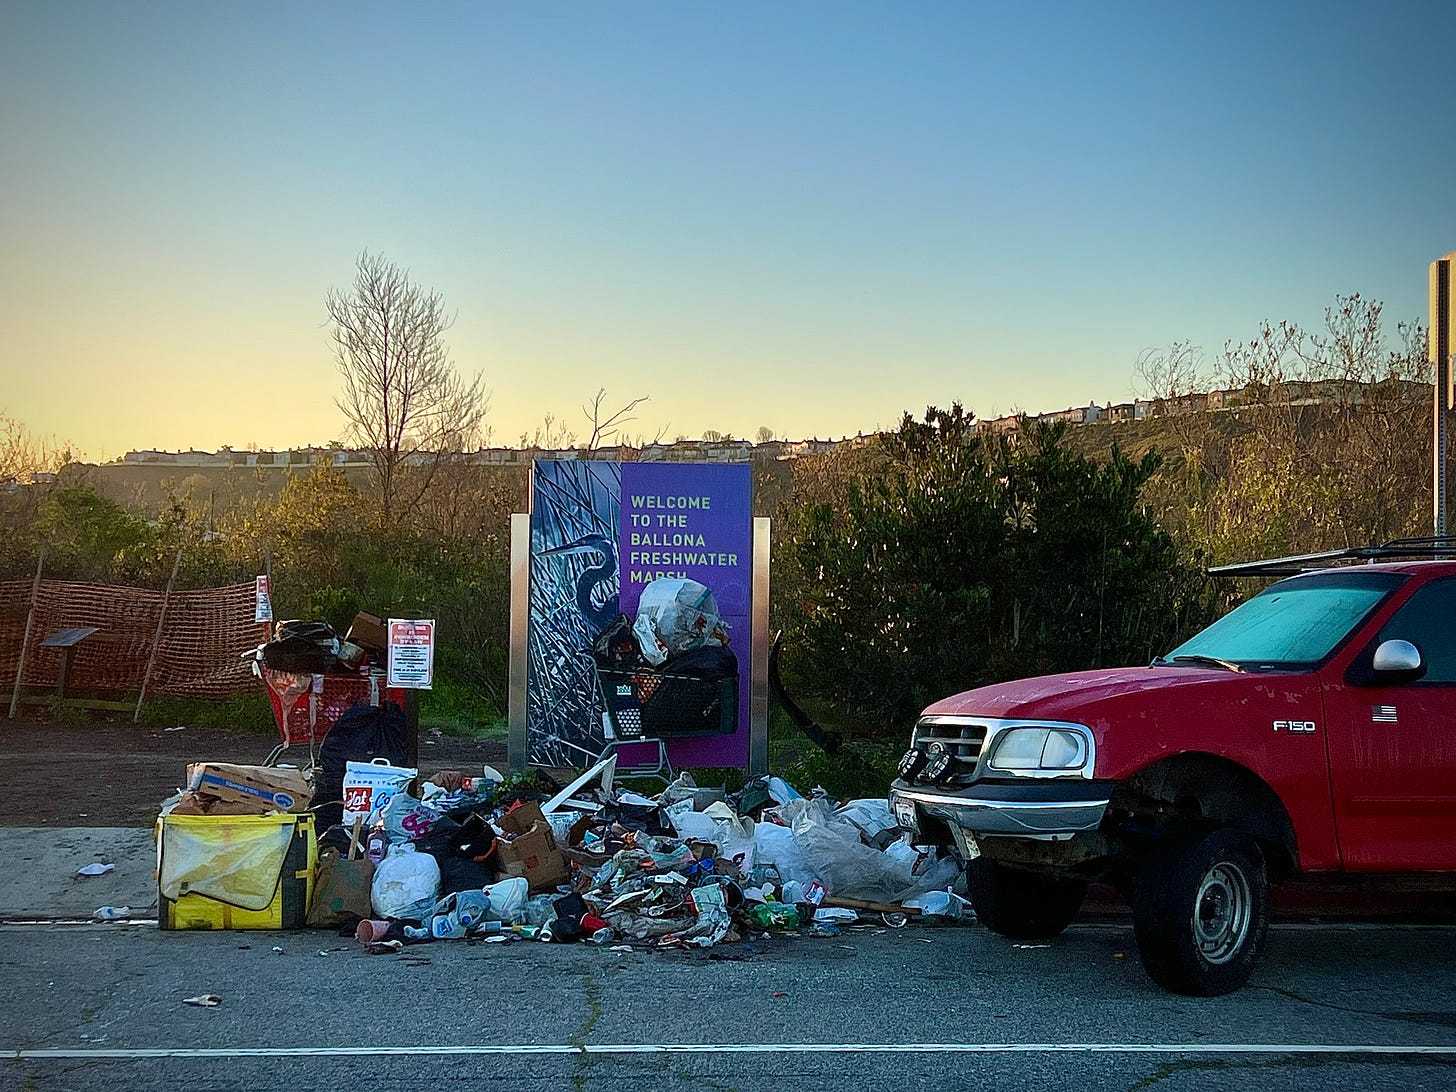 Picture of a sign that says "Welcome to the Ballona Freshwater Marsh," with an image of a great blue heron, in the front of which is a huge pile of trash, two shopping carts loaded with junk, and the front end of a red Ford F150 pickup truck with a frosted windshield and an American flag decal below the drivers' side mirror